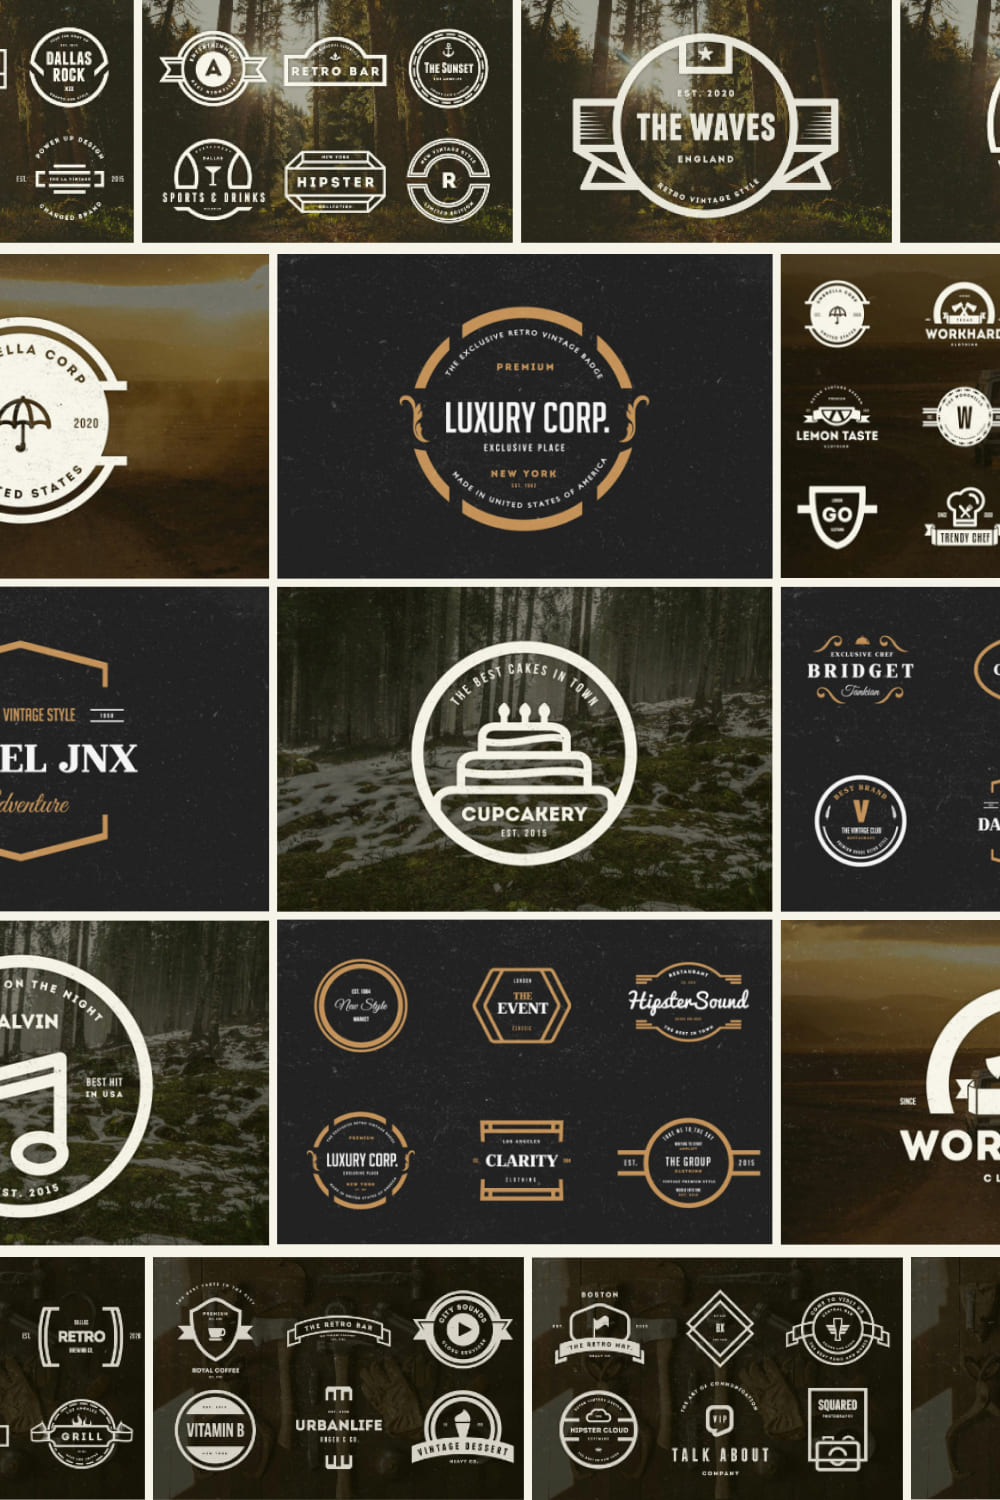 Each logo have been created with care with the finest details.